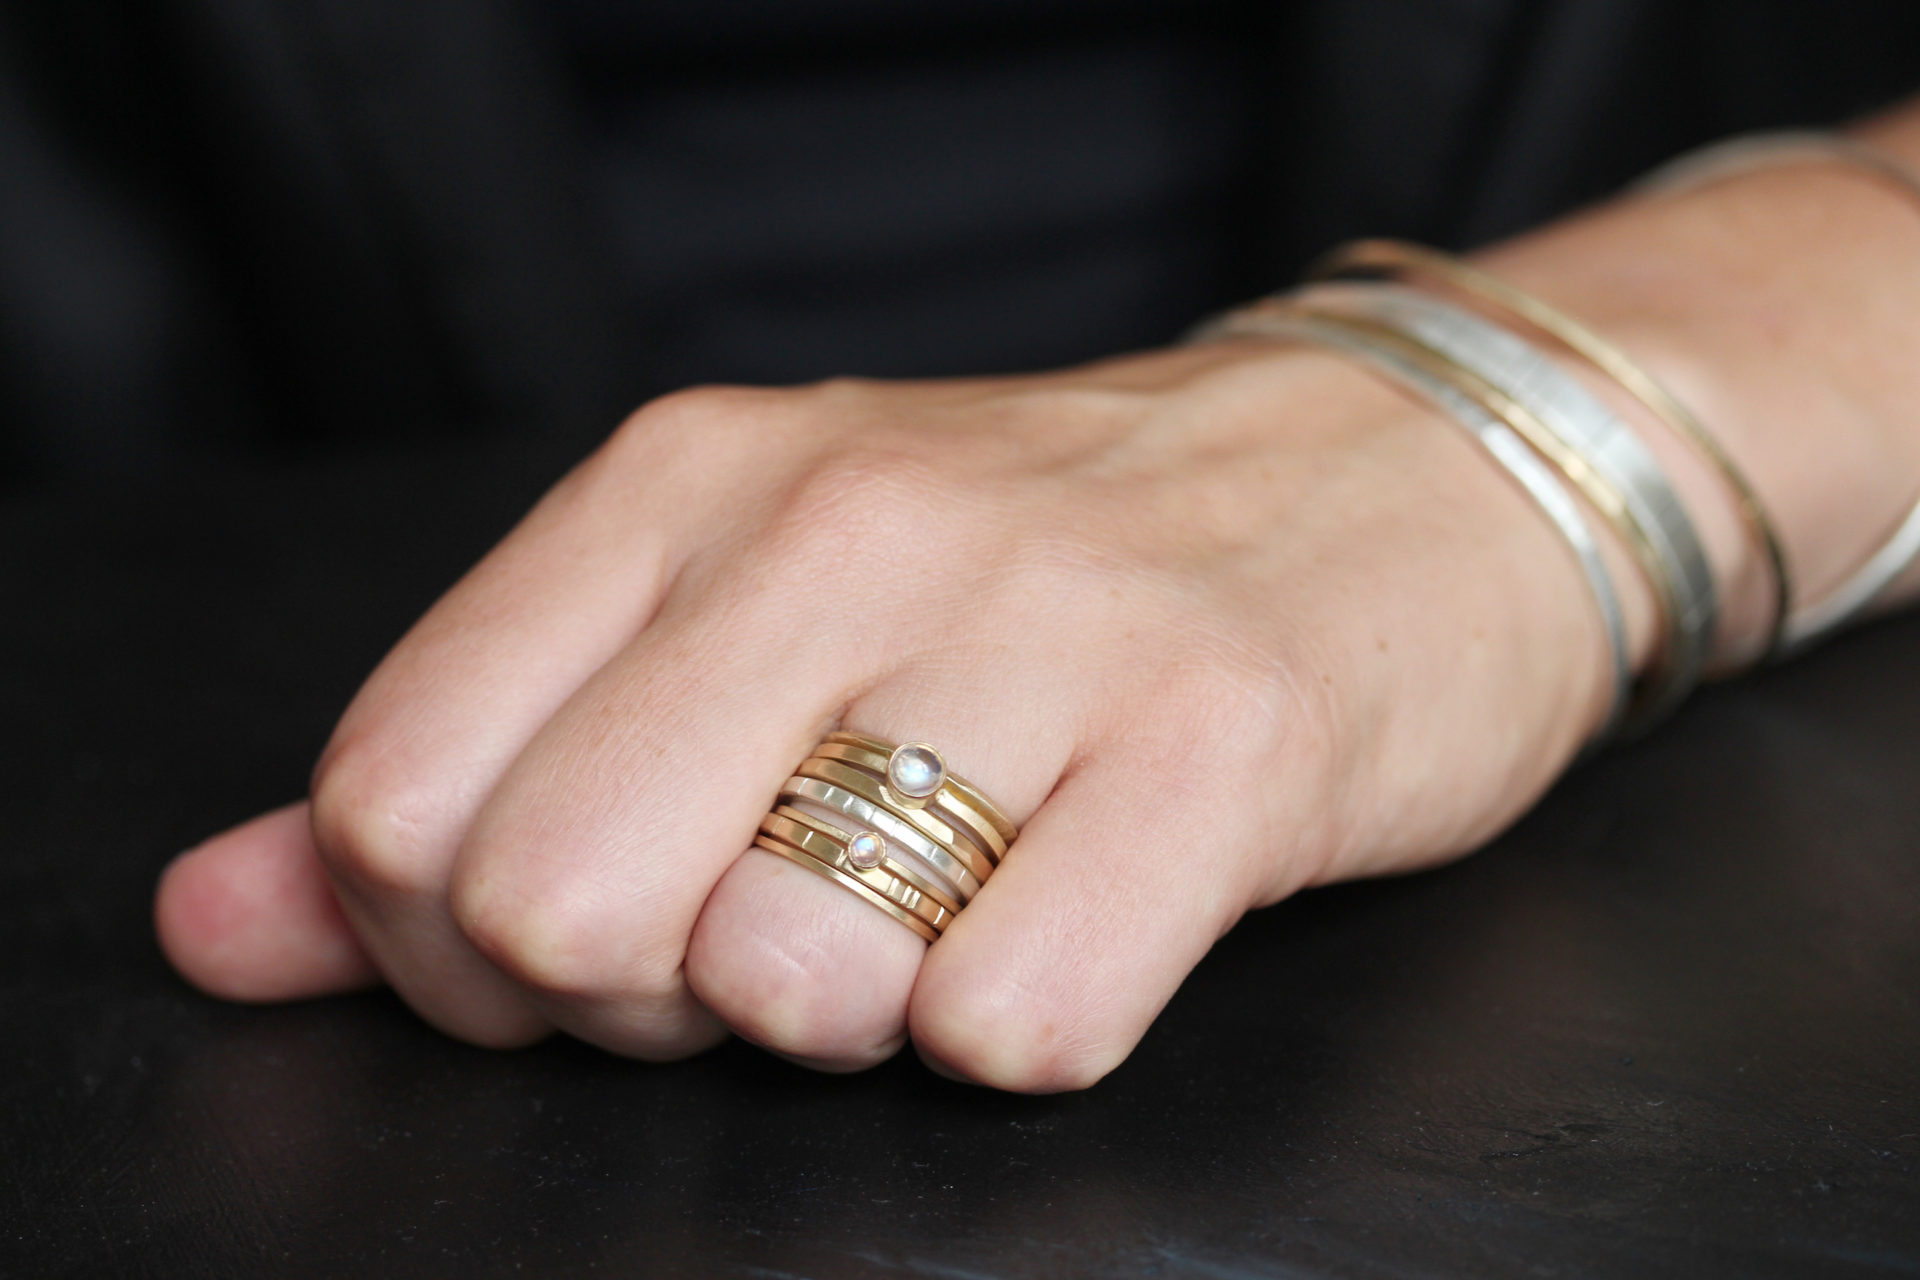 photo of a closed hand with rings and bangle bracelets